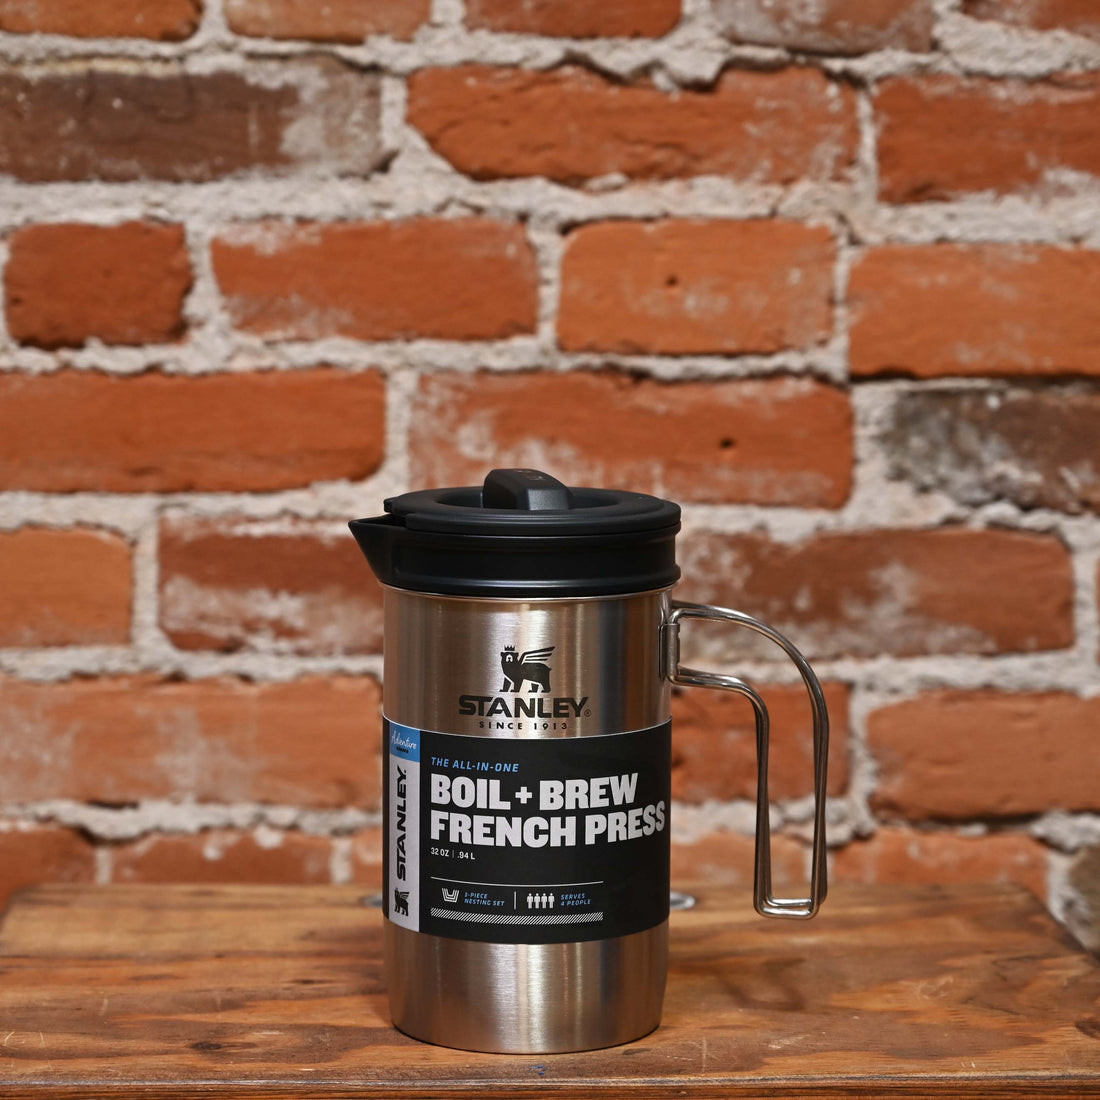 Stanley All-in One Brew &amp; Boil French Press